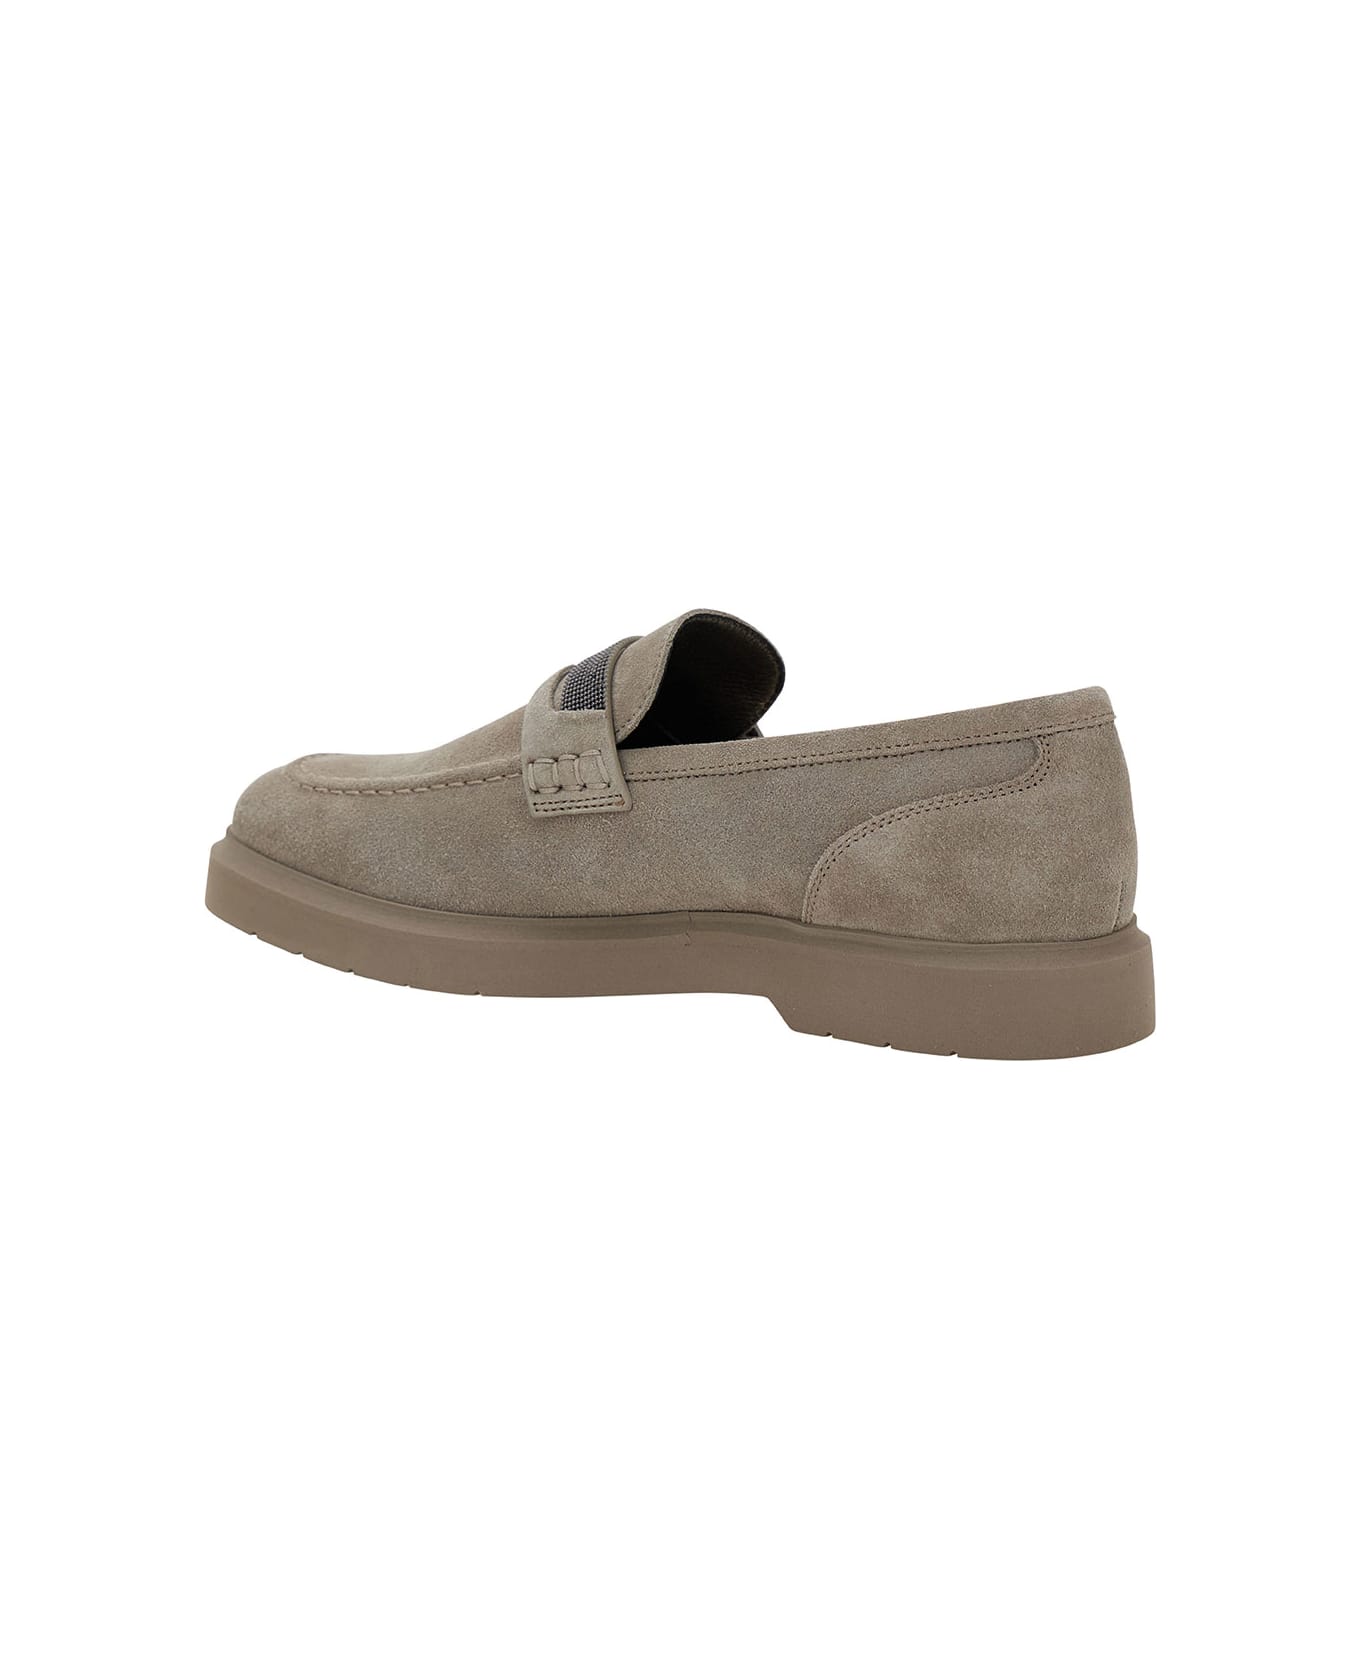 Brunello Cucinelli Grey Loafers With Monile Detail In Suede Woman - Grey